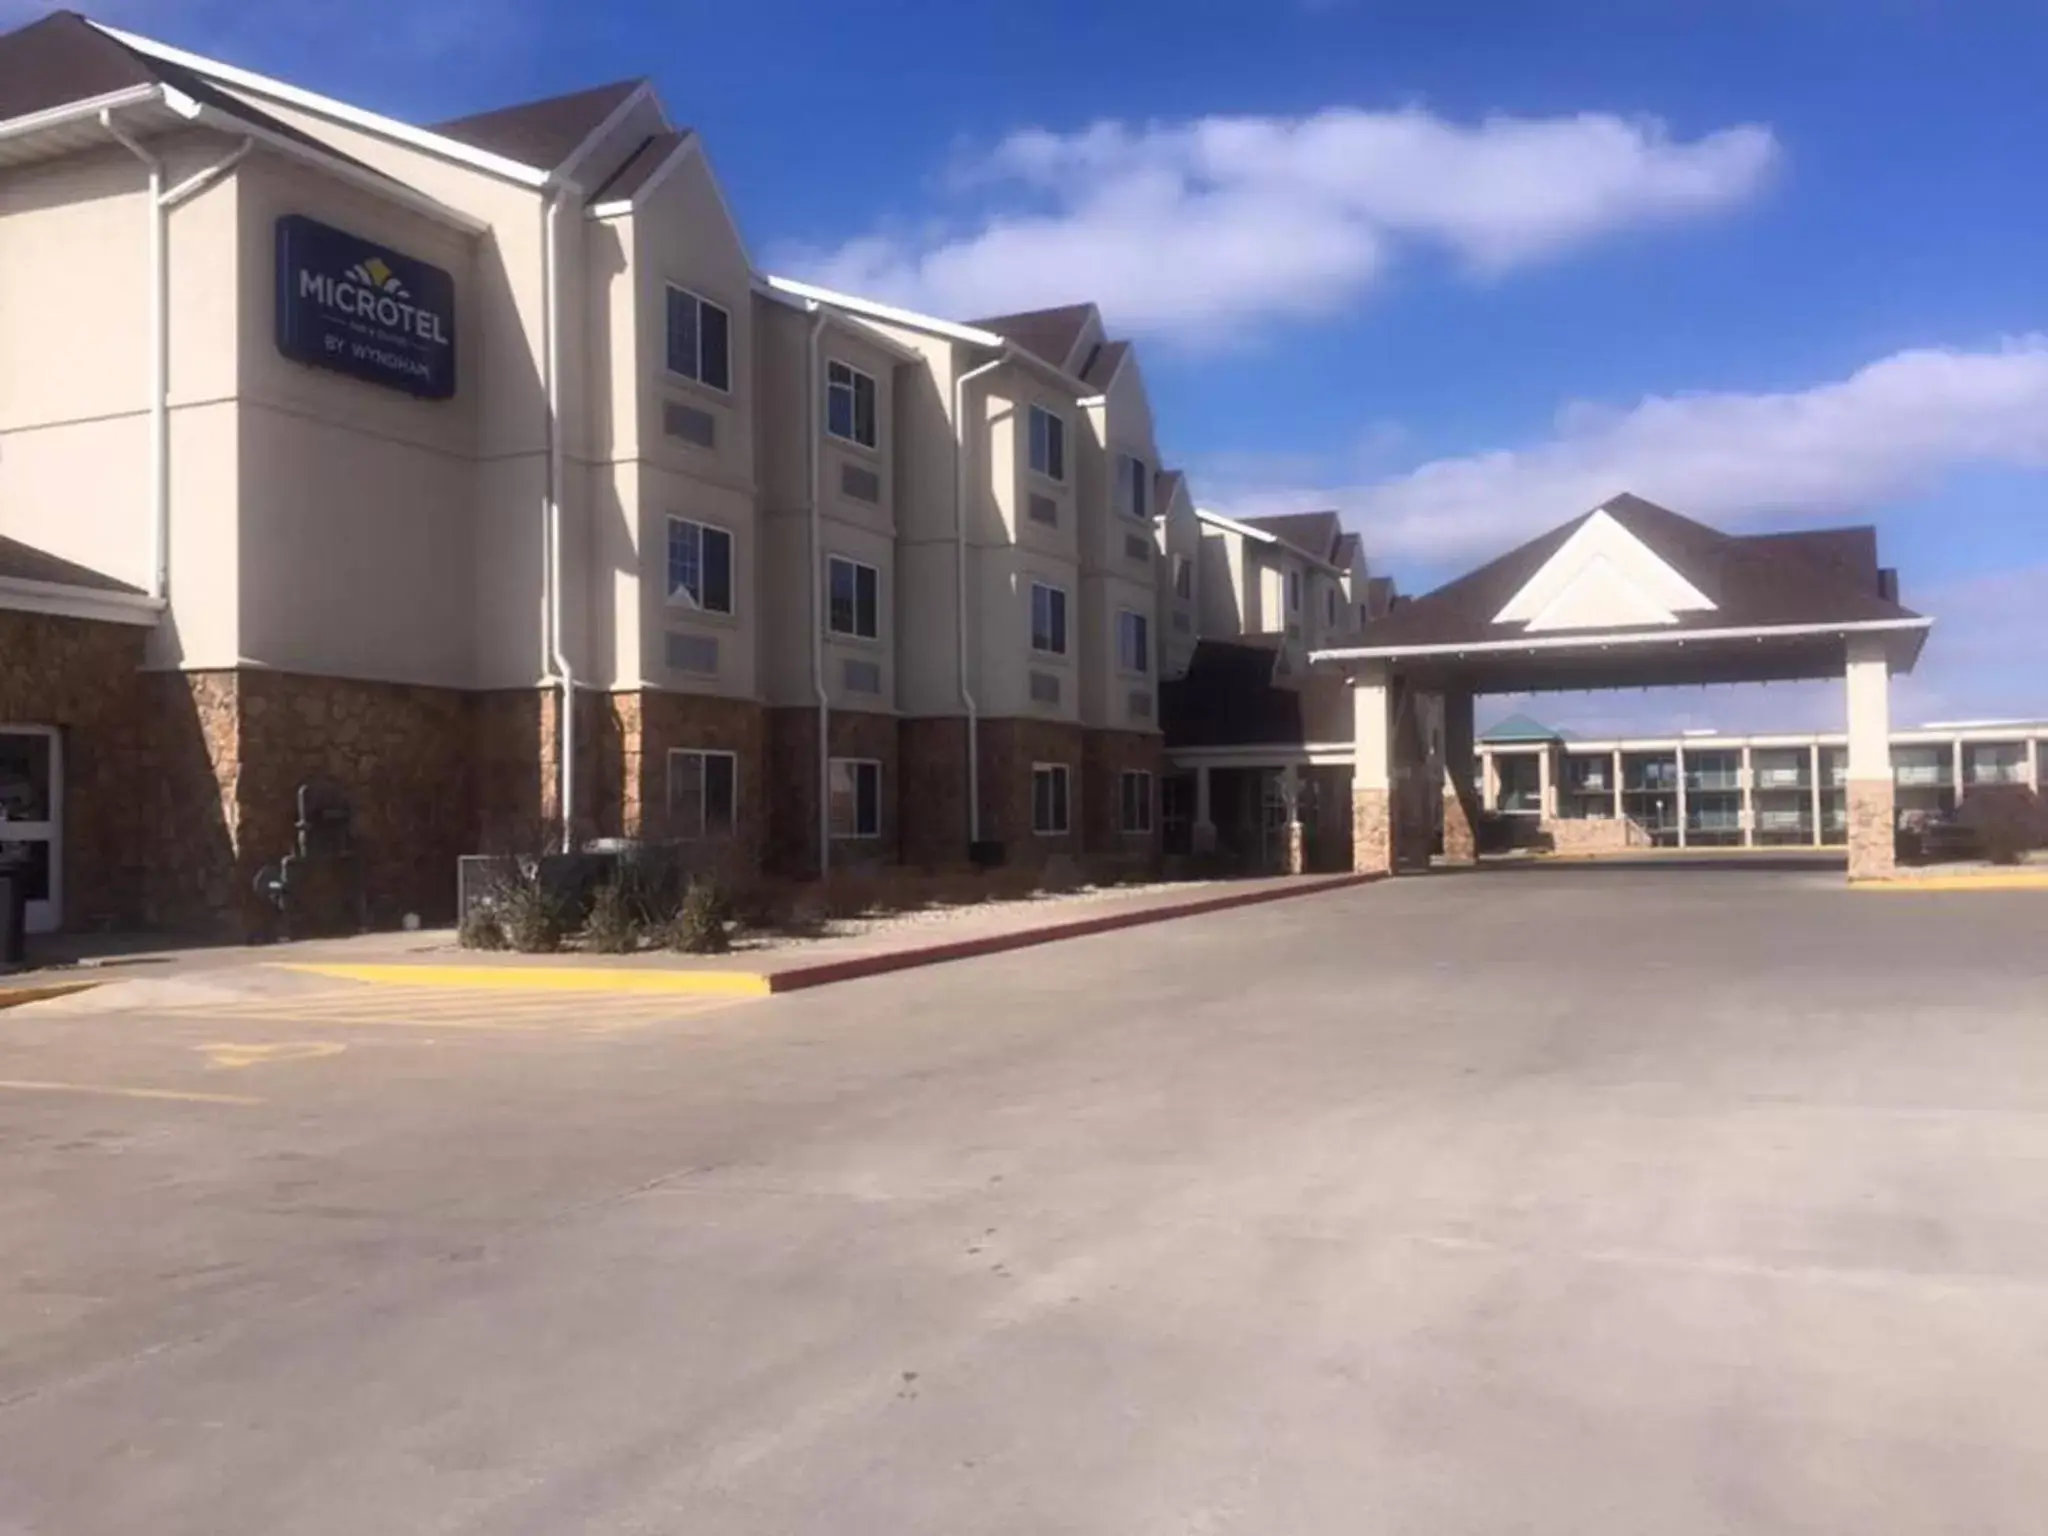 Facade/entrance, Property Building in Microtel Inn & Suites Quincy by Wyndham